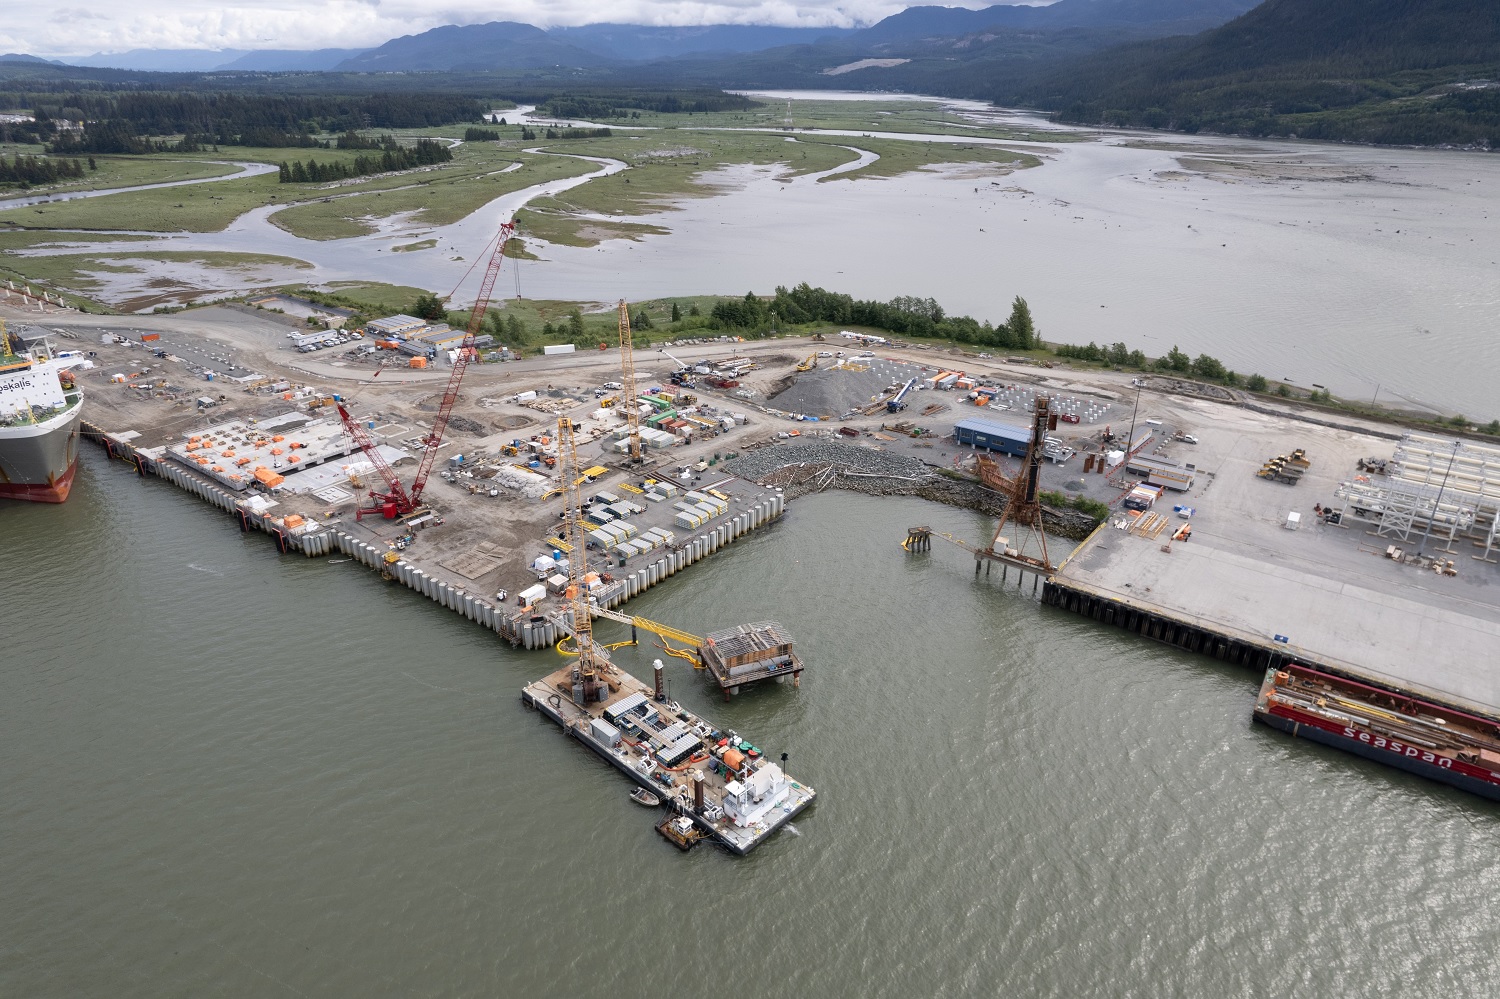 BESIX, Vanpile close to completing marine LNG terminal in Canada